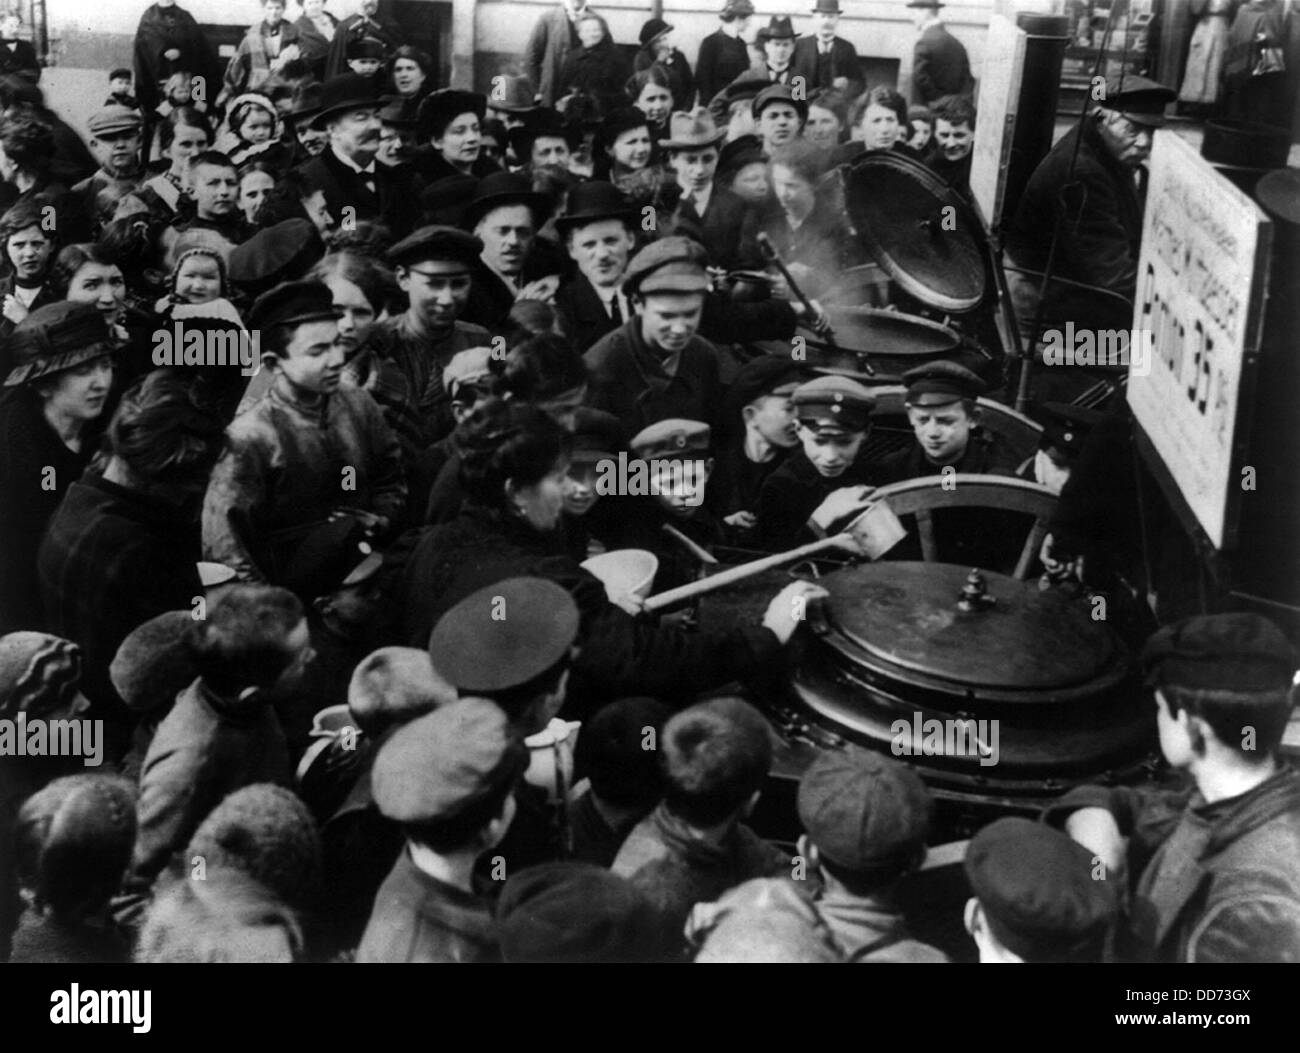 German civilians crowding around soup pots in Berlin during WW1 in 1916. Due to the Allied blockade, food shortages resulted in Stock Photo